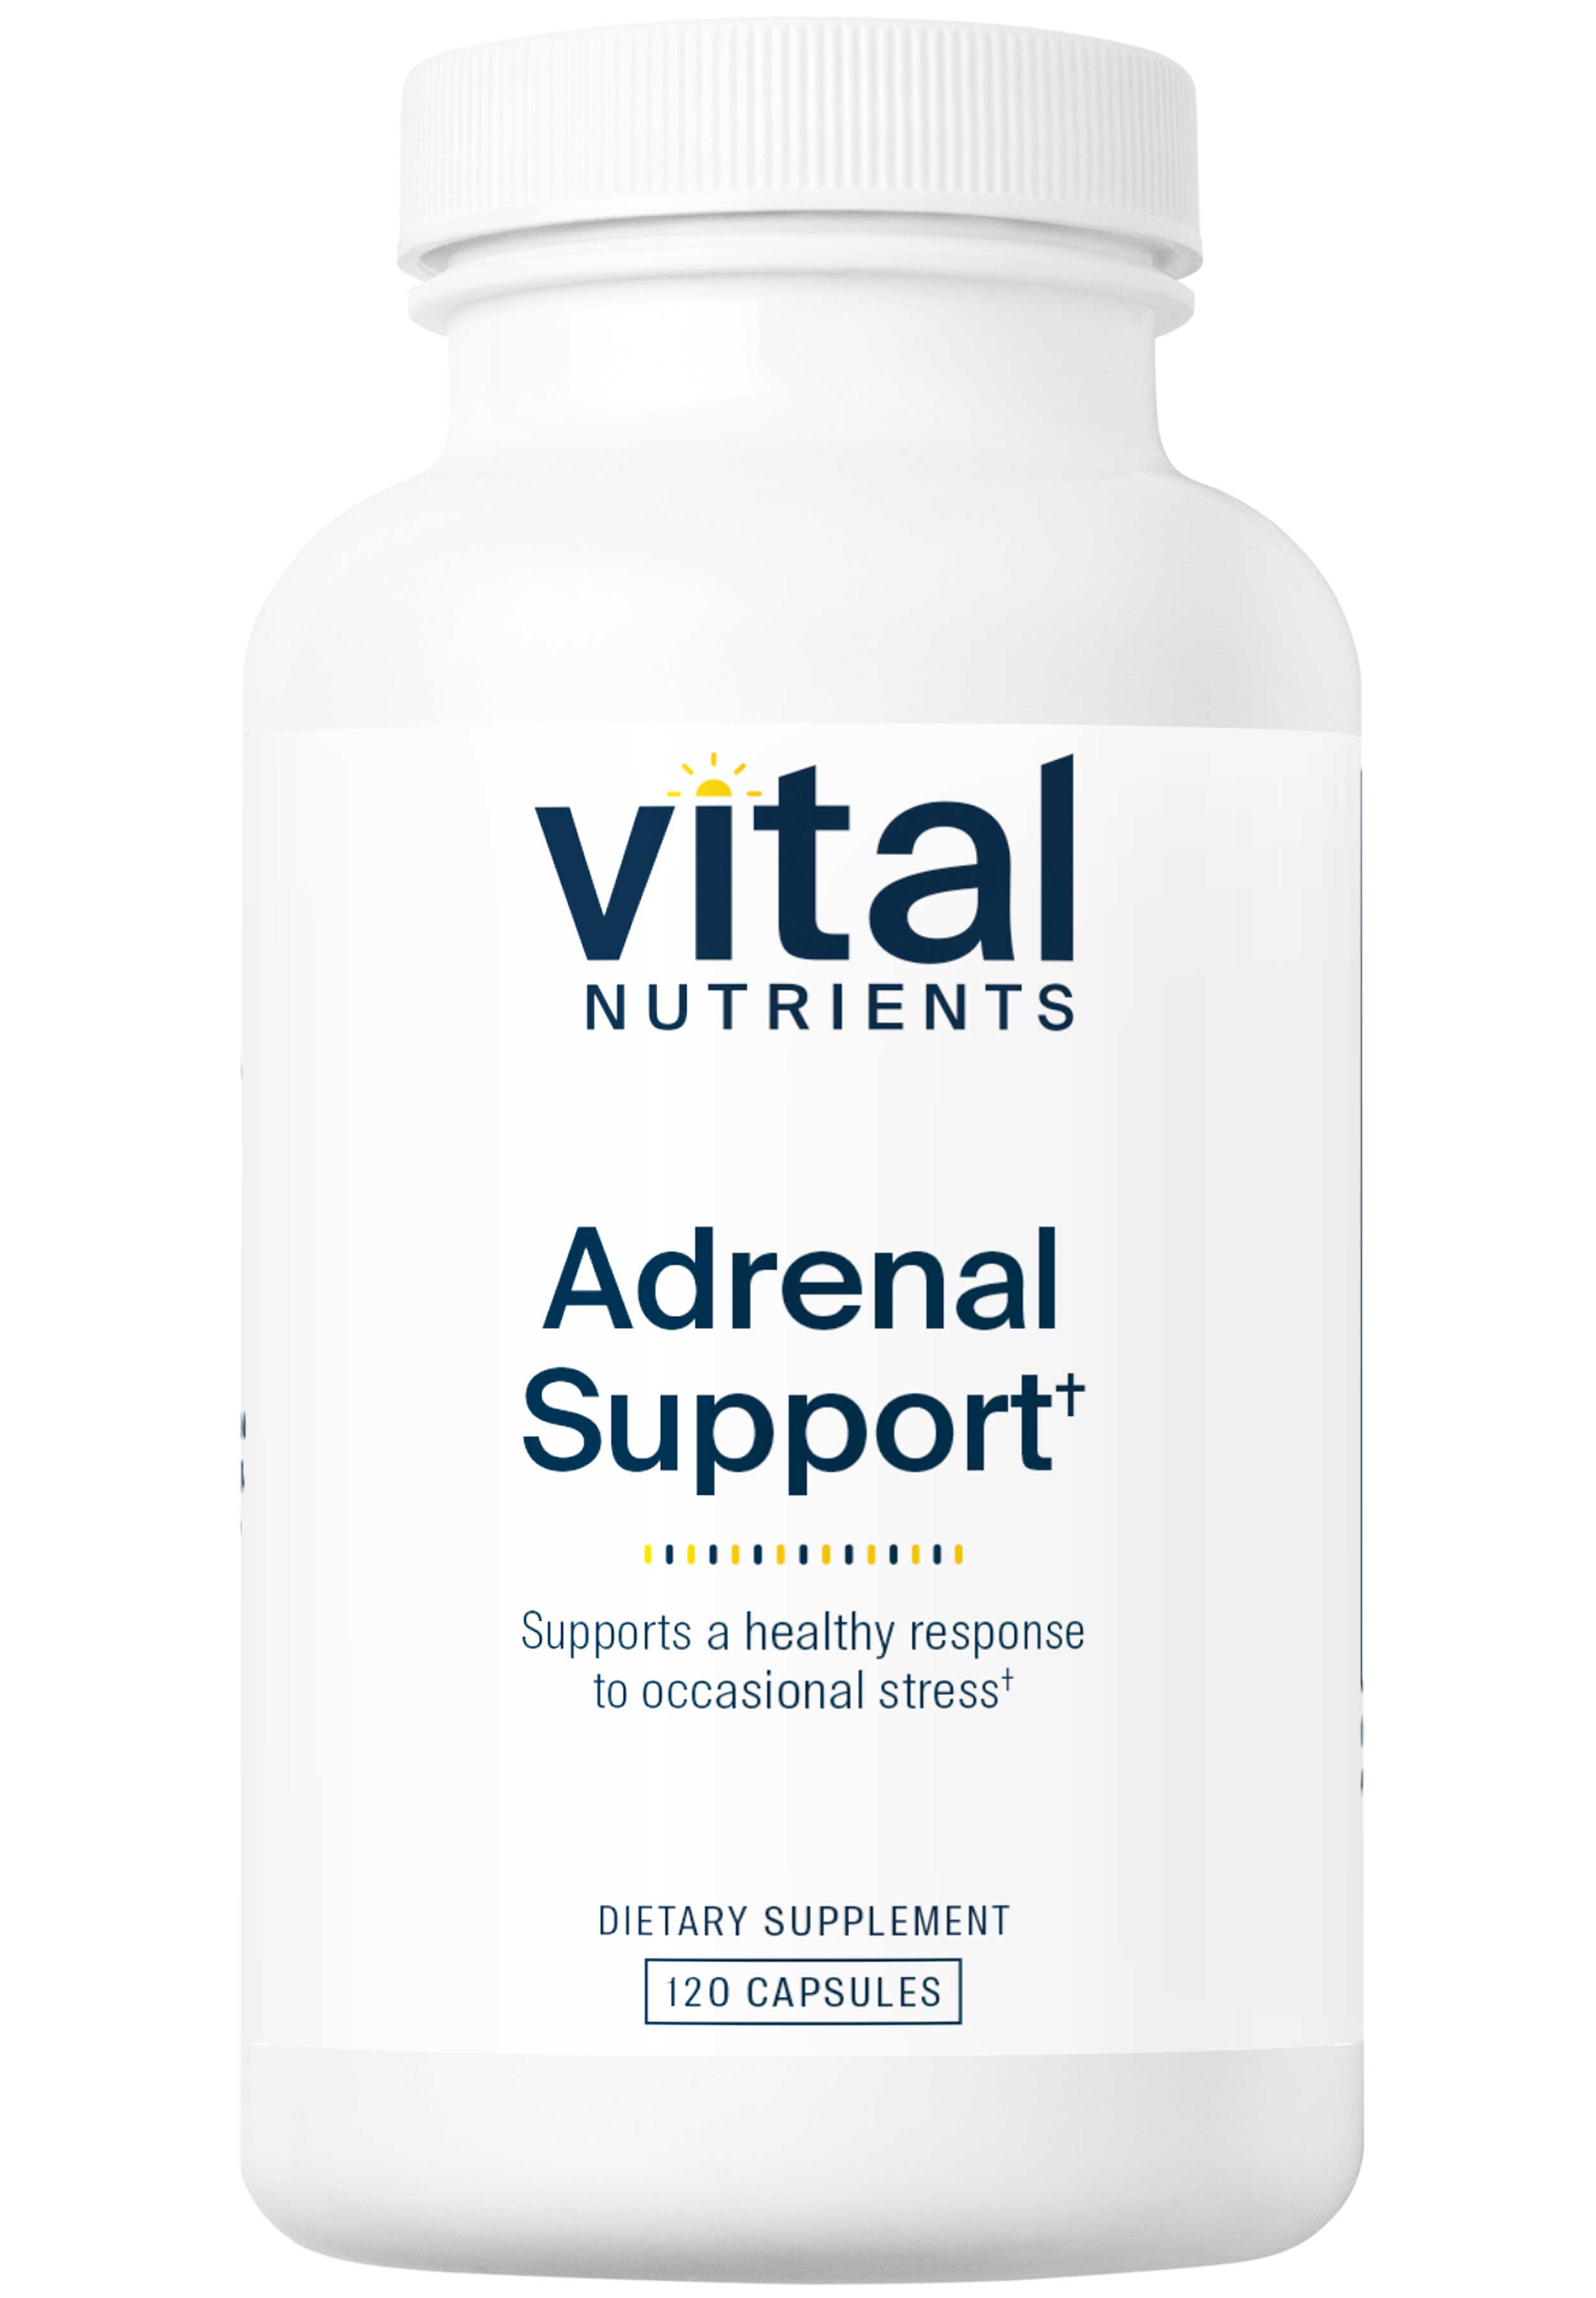 Vital Nutrients Adrenal Support